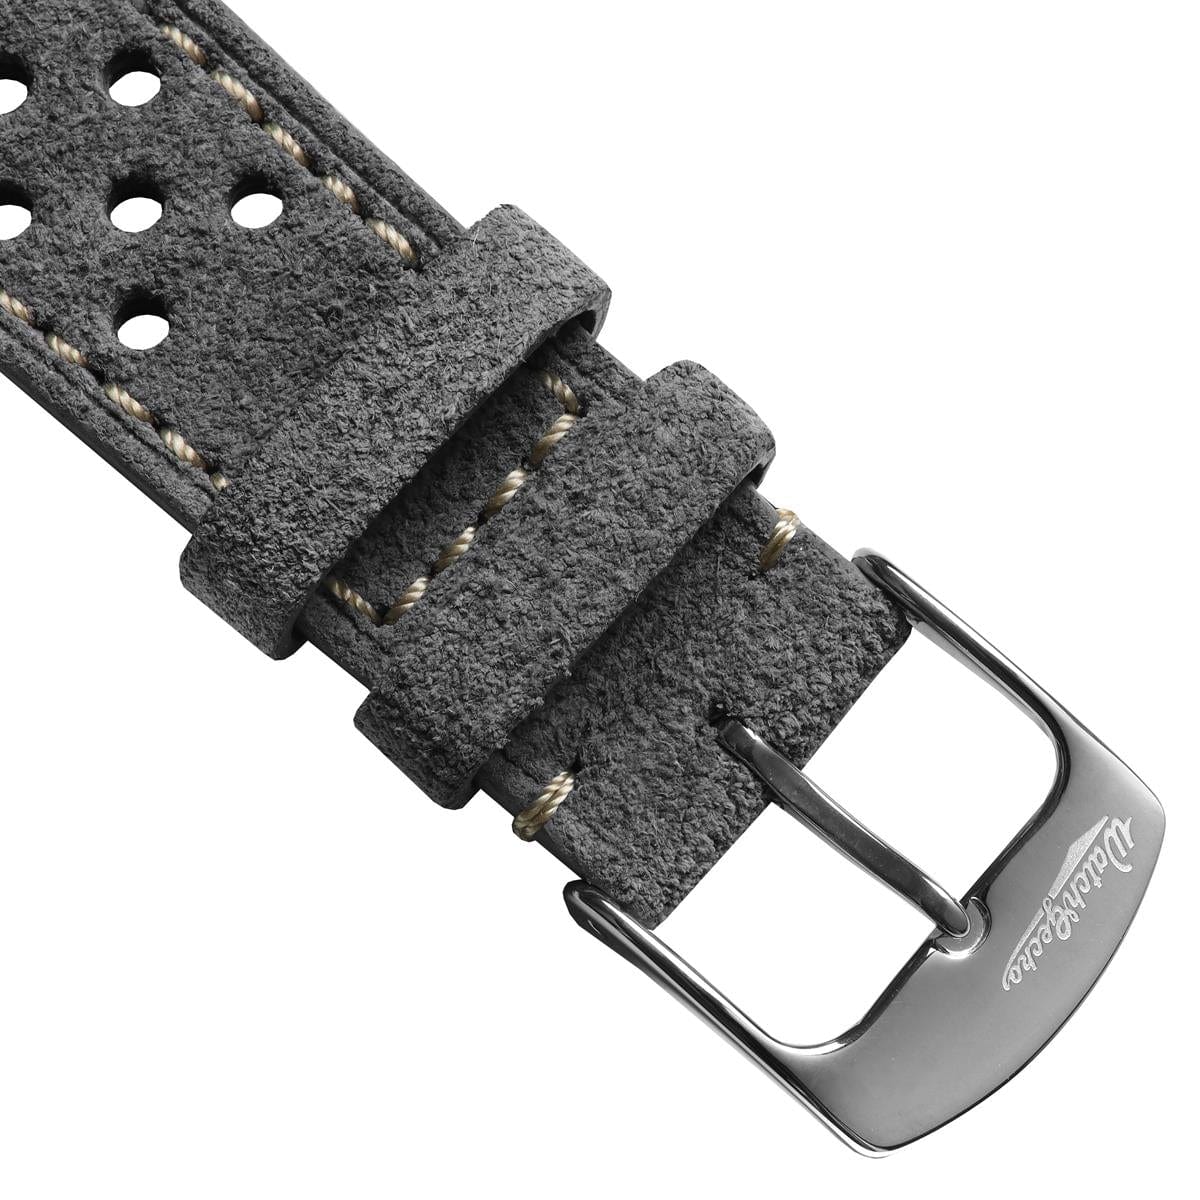 Beaufort Racing Conceria Opera Suede Perforated Watch Strap - Light Grey